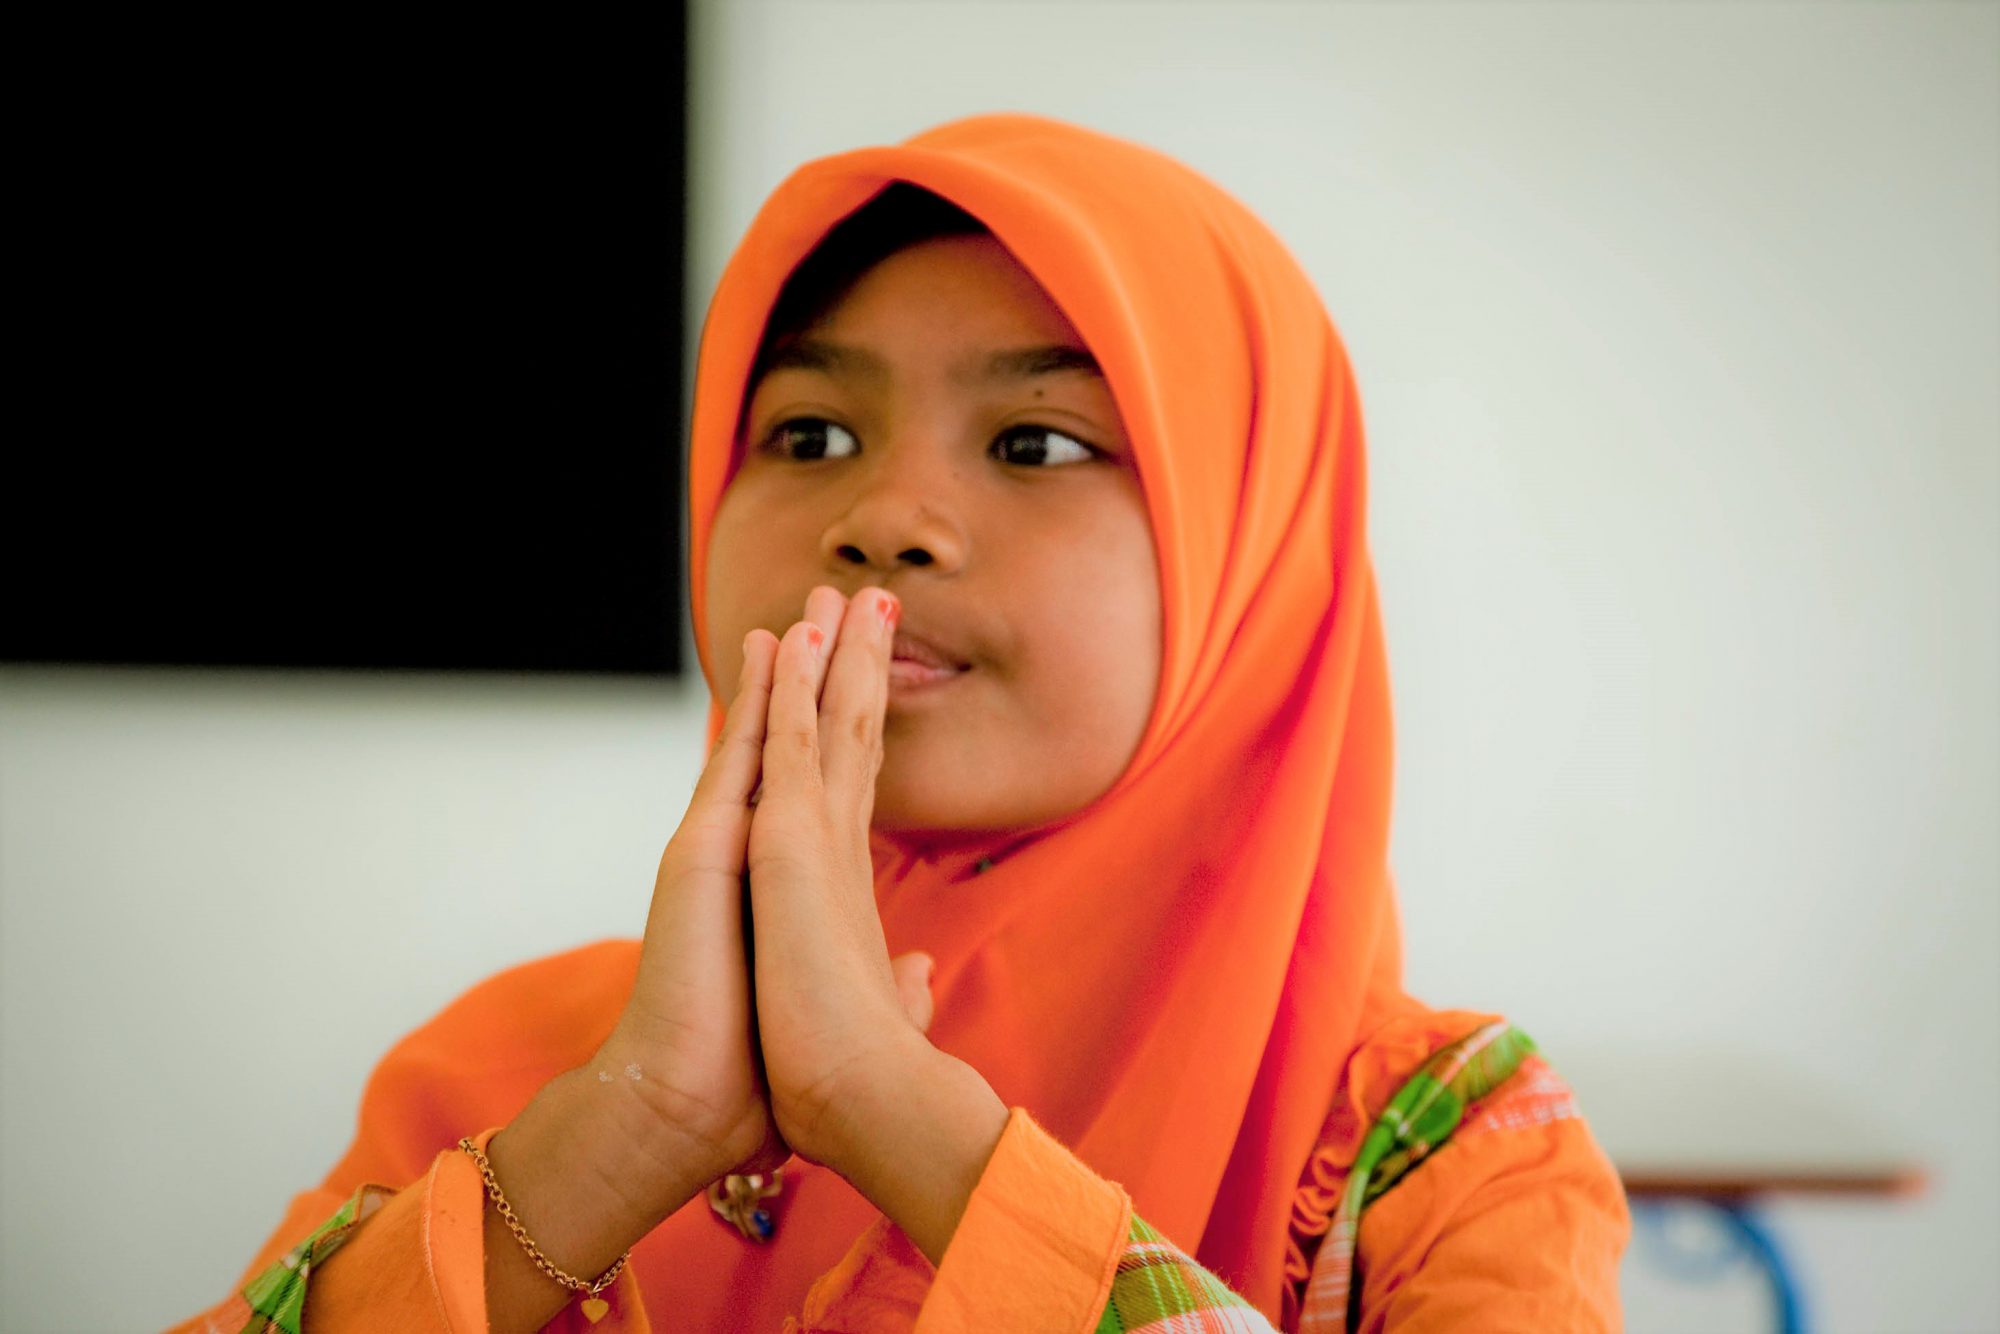 Young girl prayer with hands in front of her face.